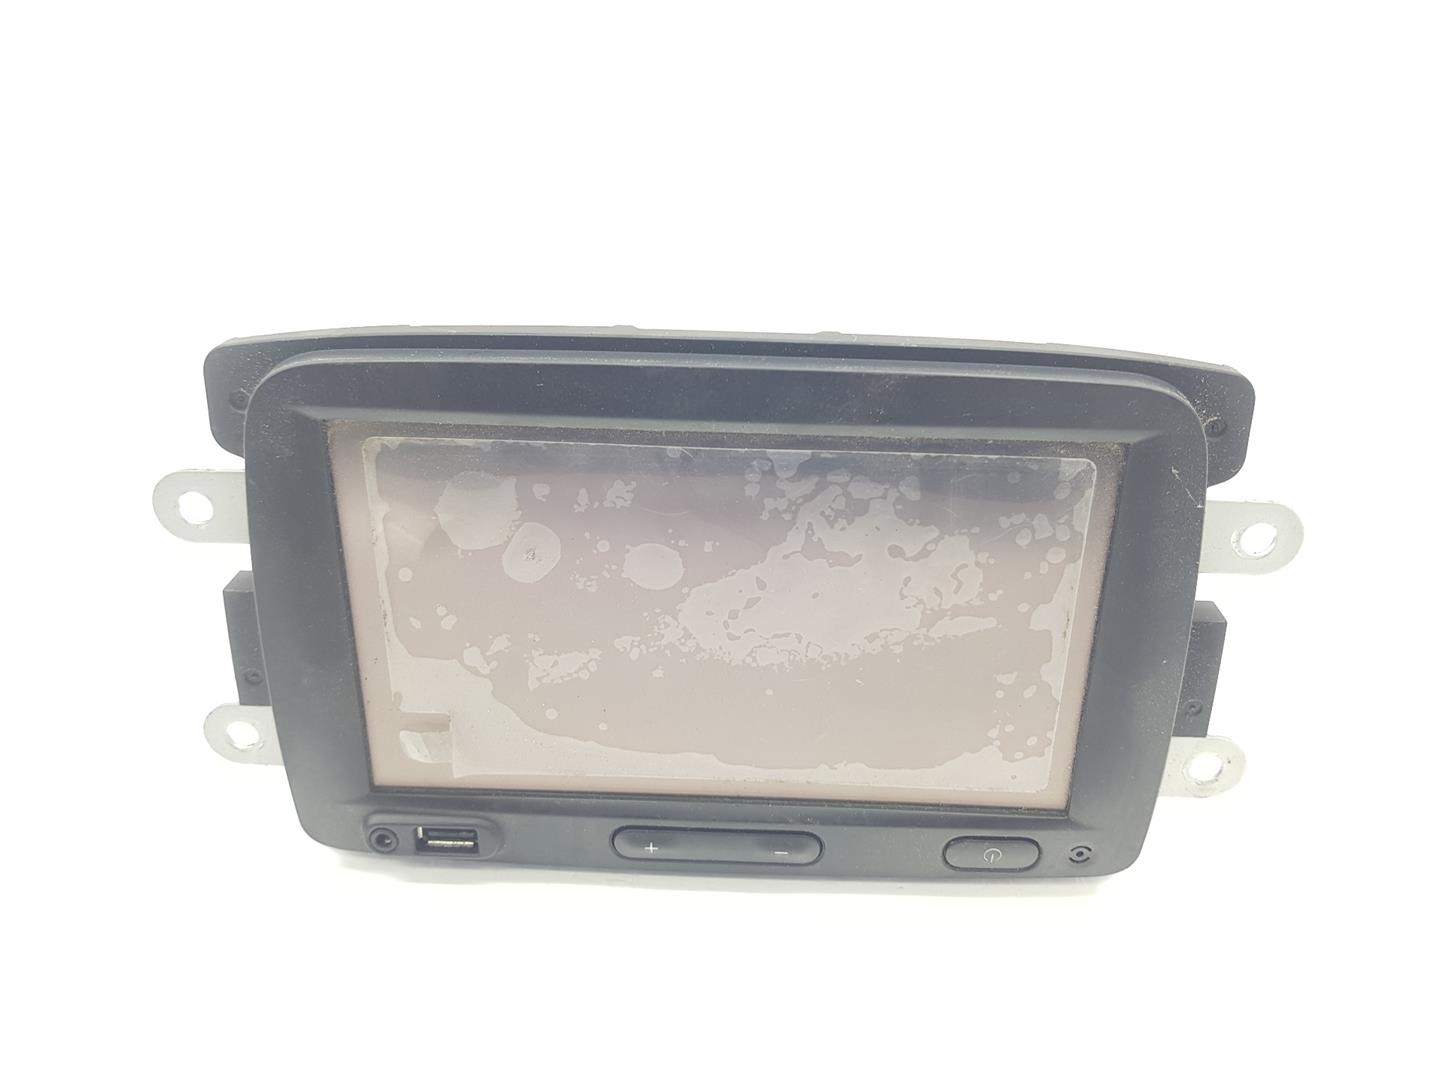 RENAULT Trafic 2 generation (2001-2015) Music Player Without GPS 281153178R, 281153178R 24220743